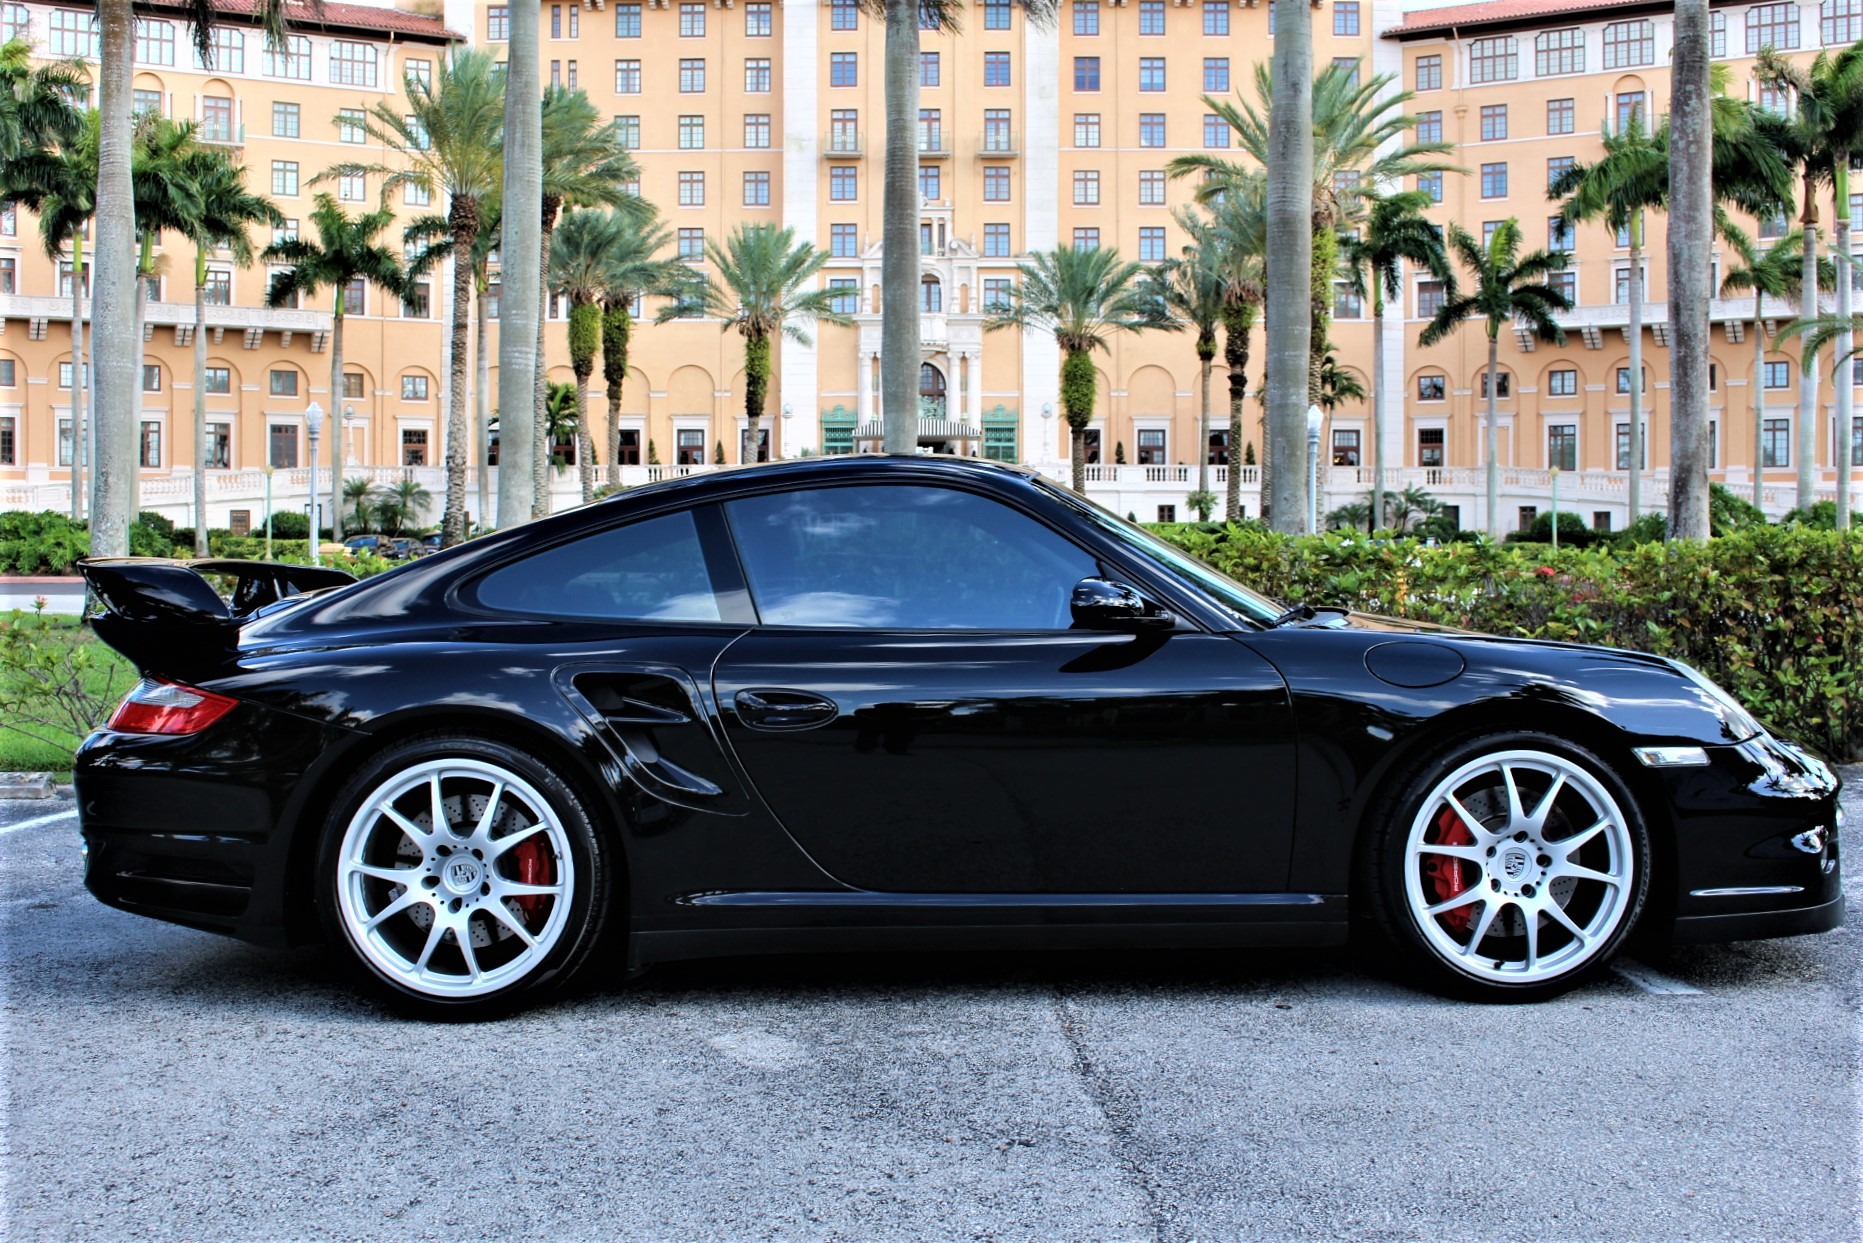 Used 2007 Porsche 911 Turbo for sale Sold at The Gables Sports Cars in Miami FL 33146 1